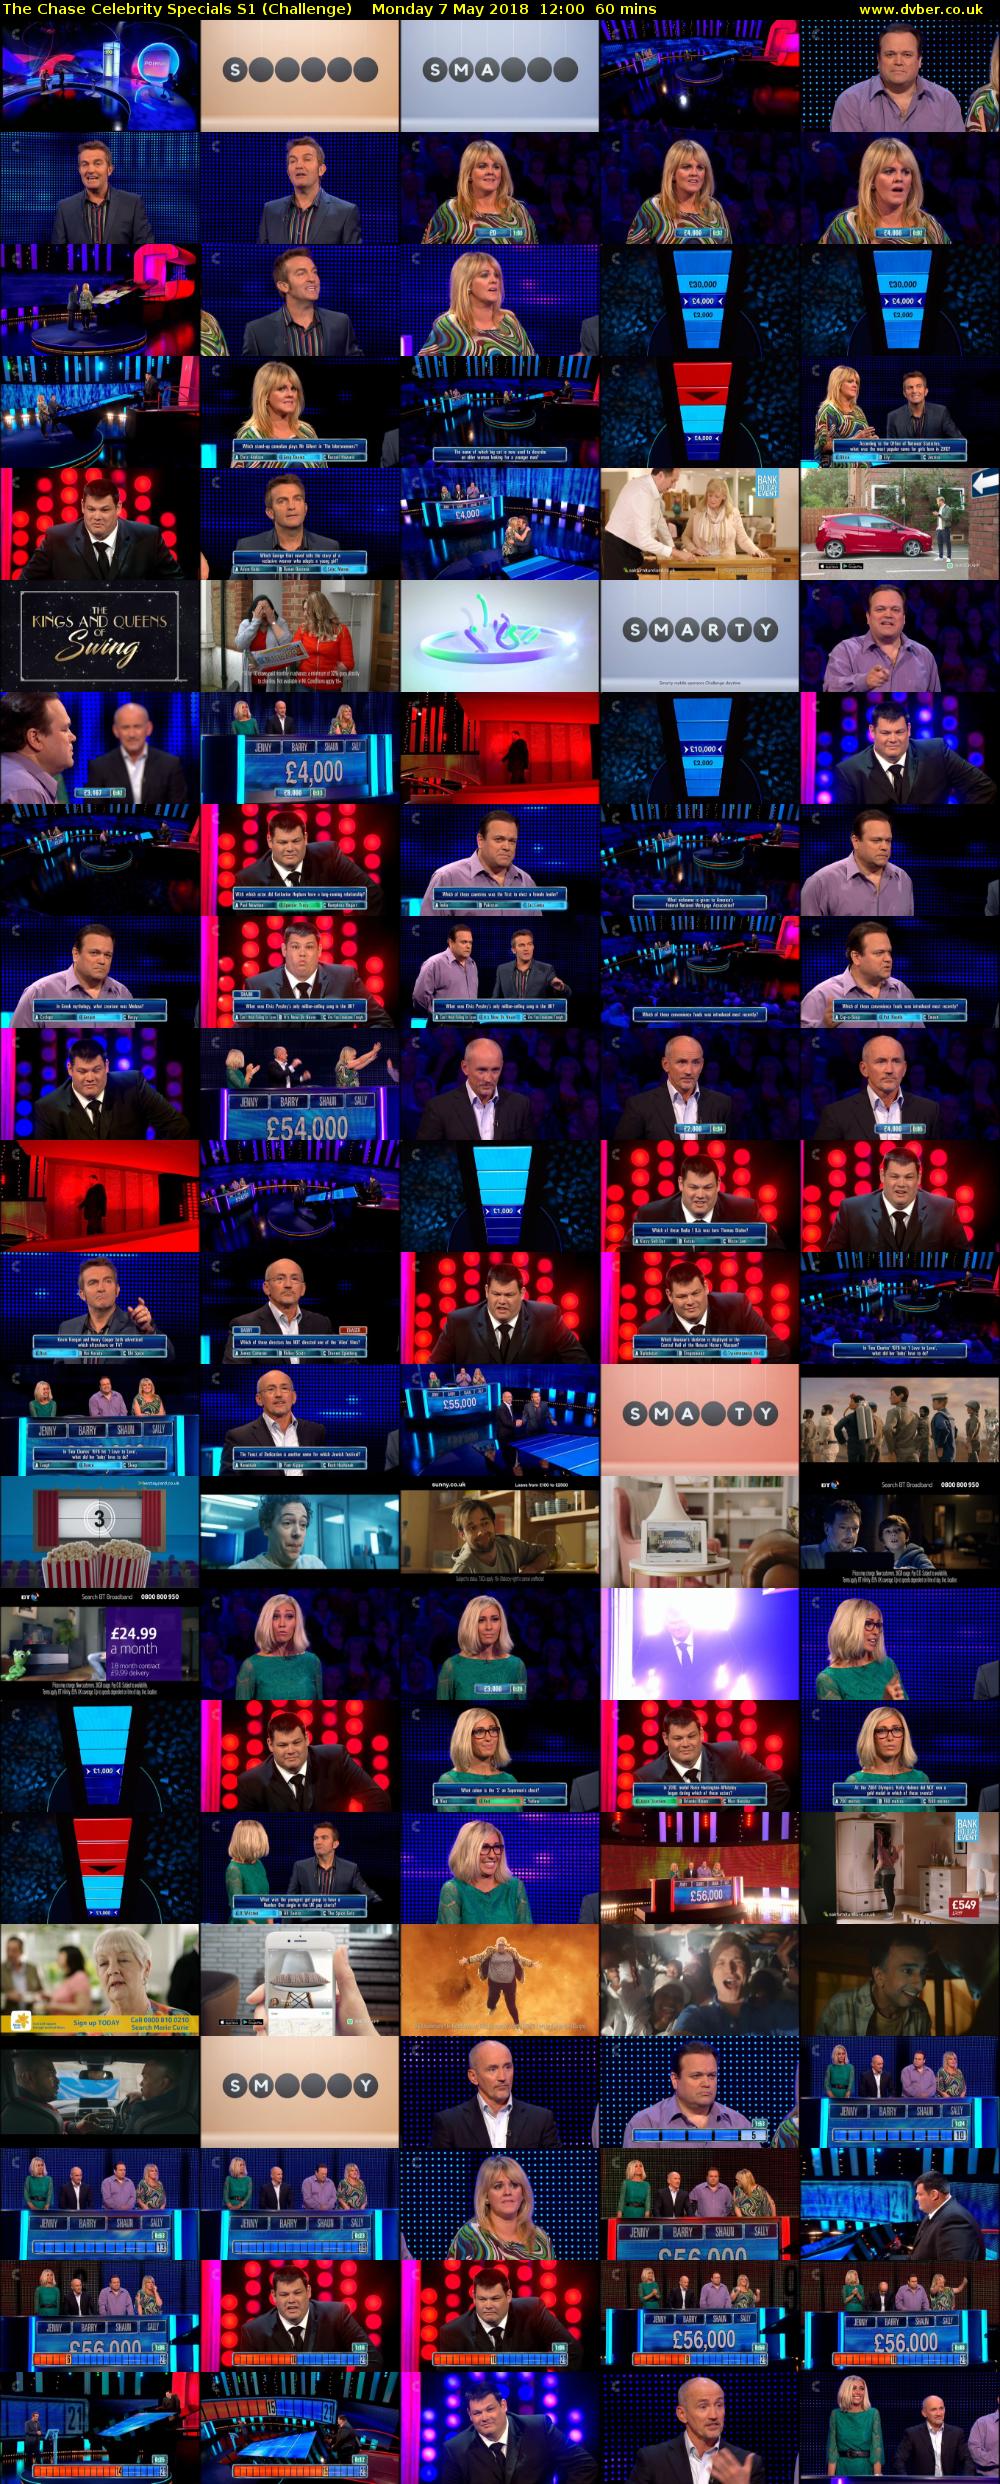 The Chase Celebrity Specials S1 (Challenge) Monday 7 May 2018 12:00 - 13:00